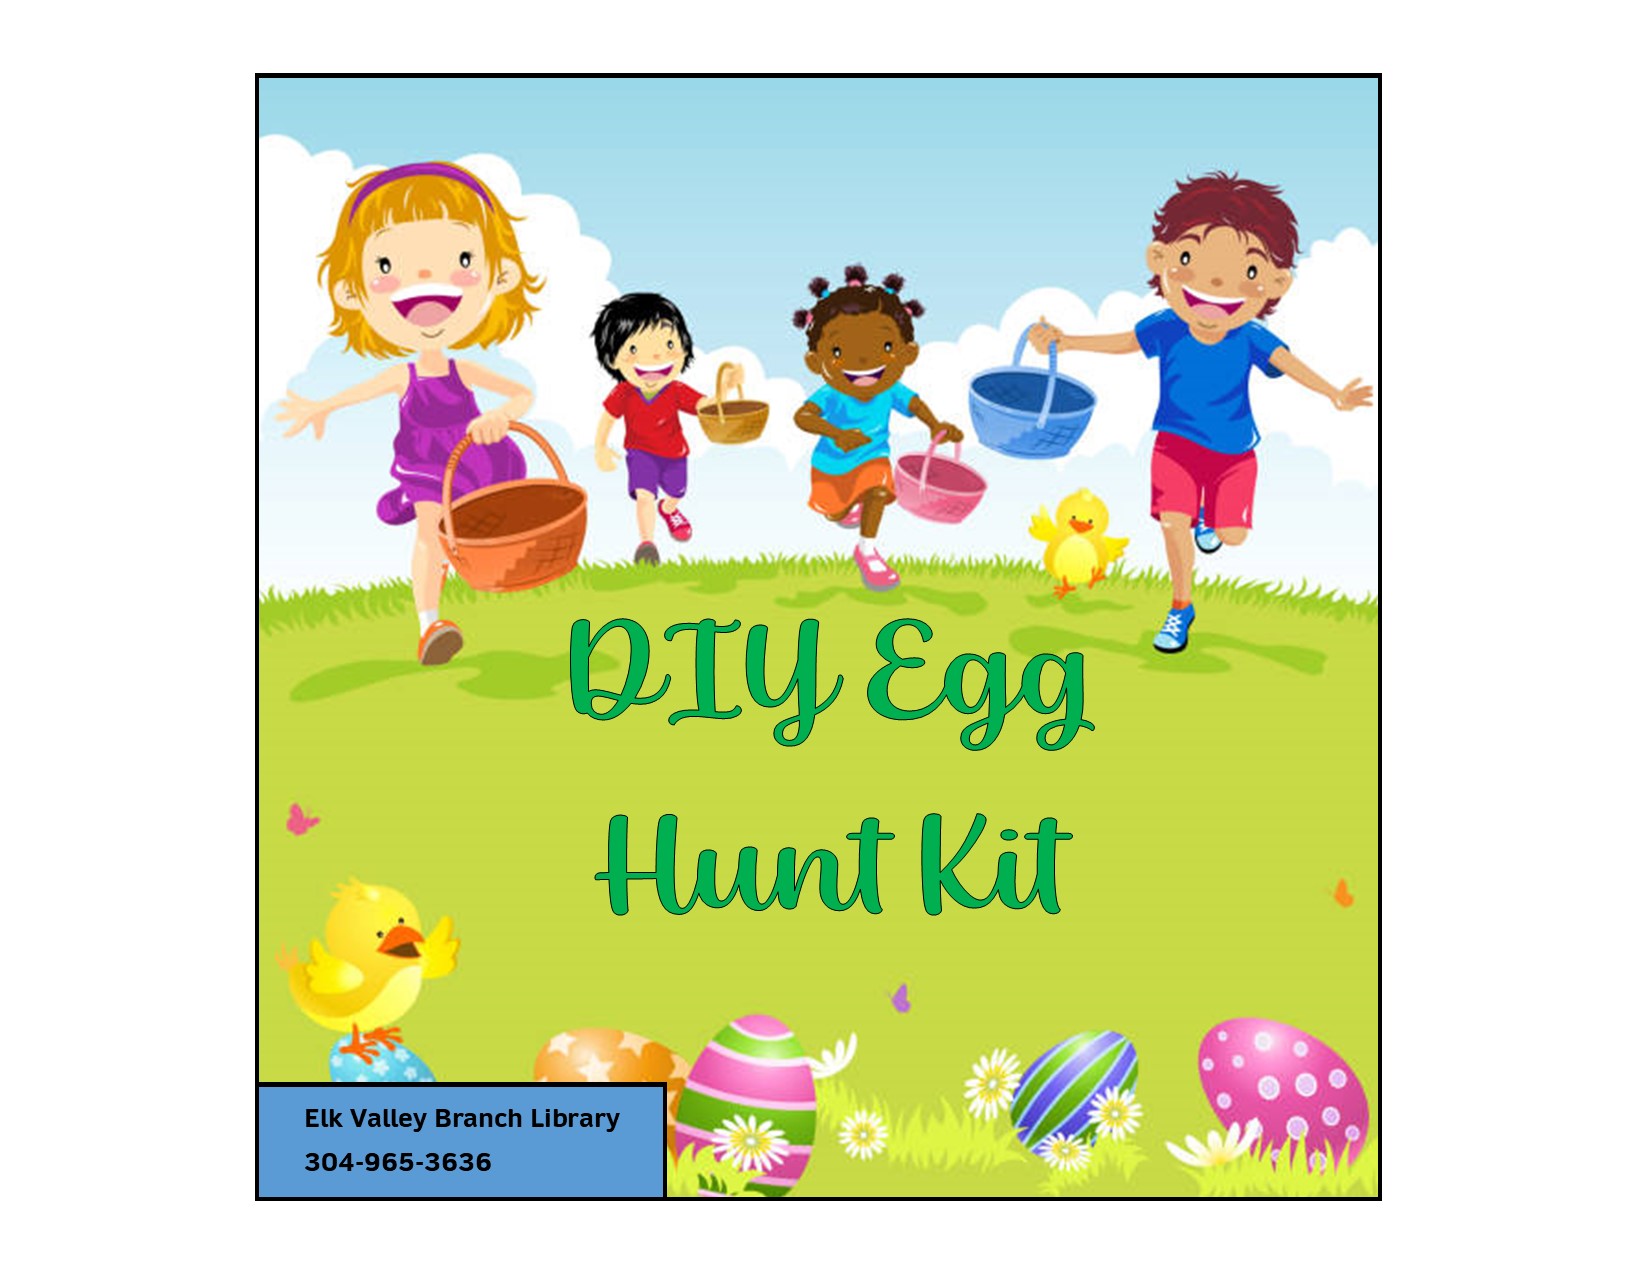 Children on egg hunt with text